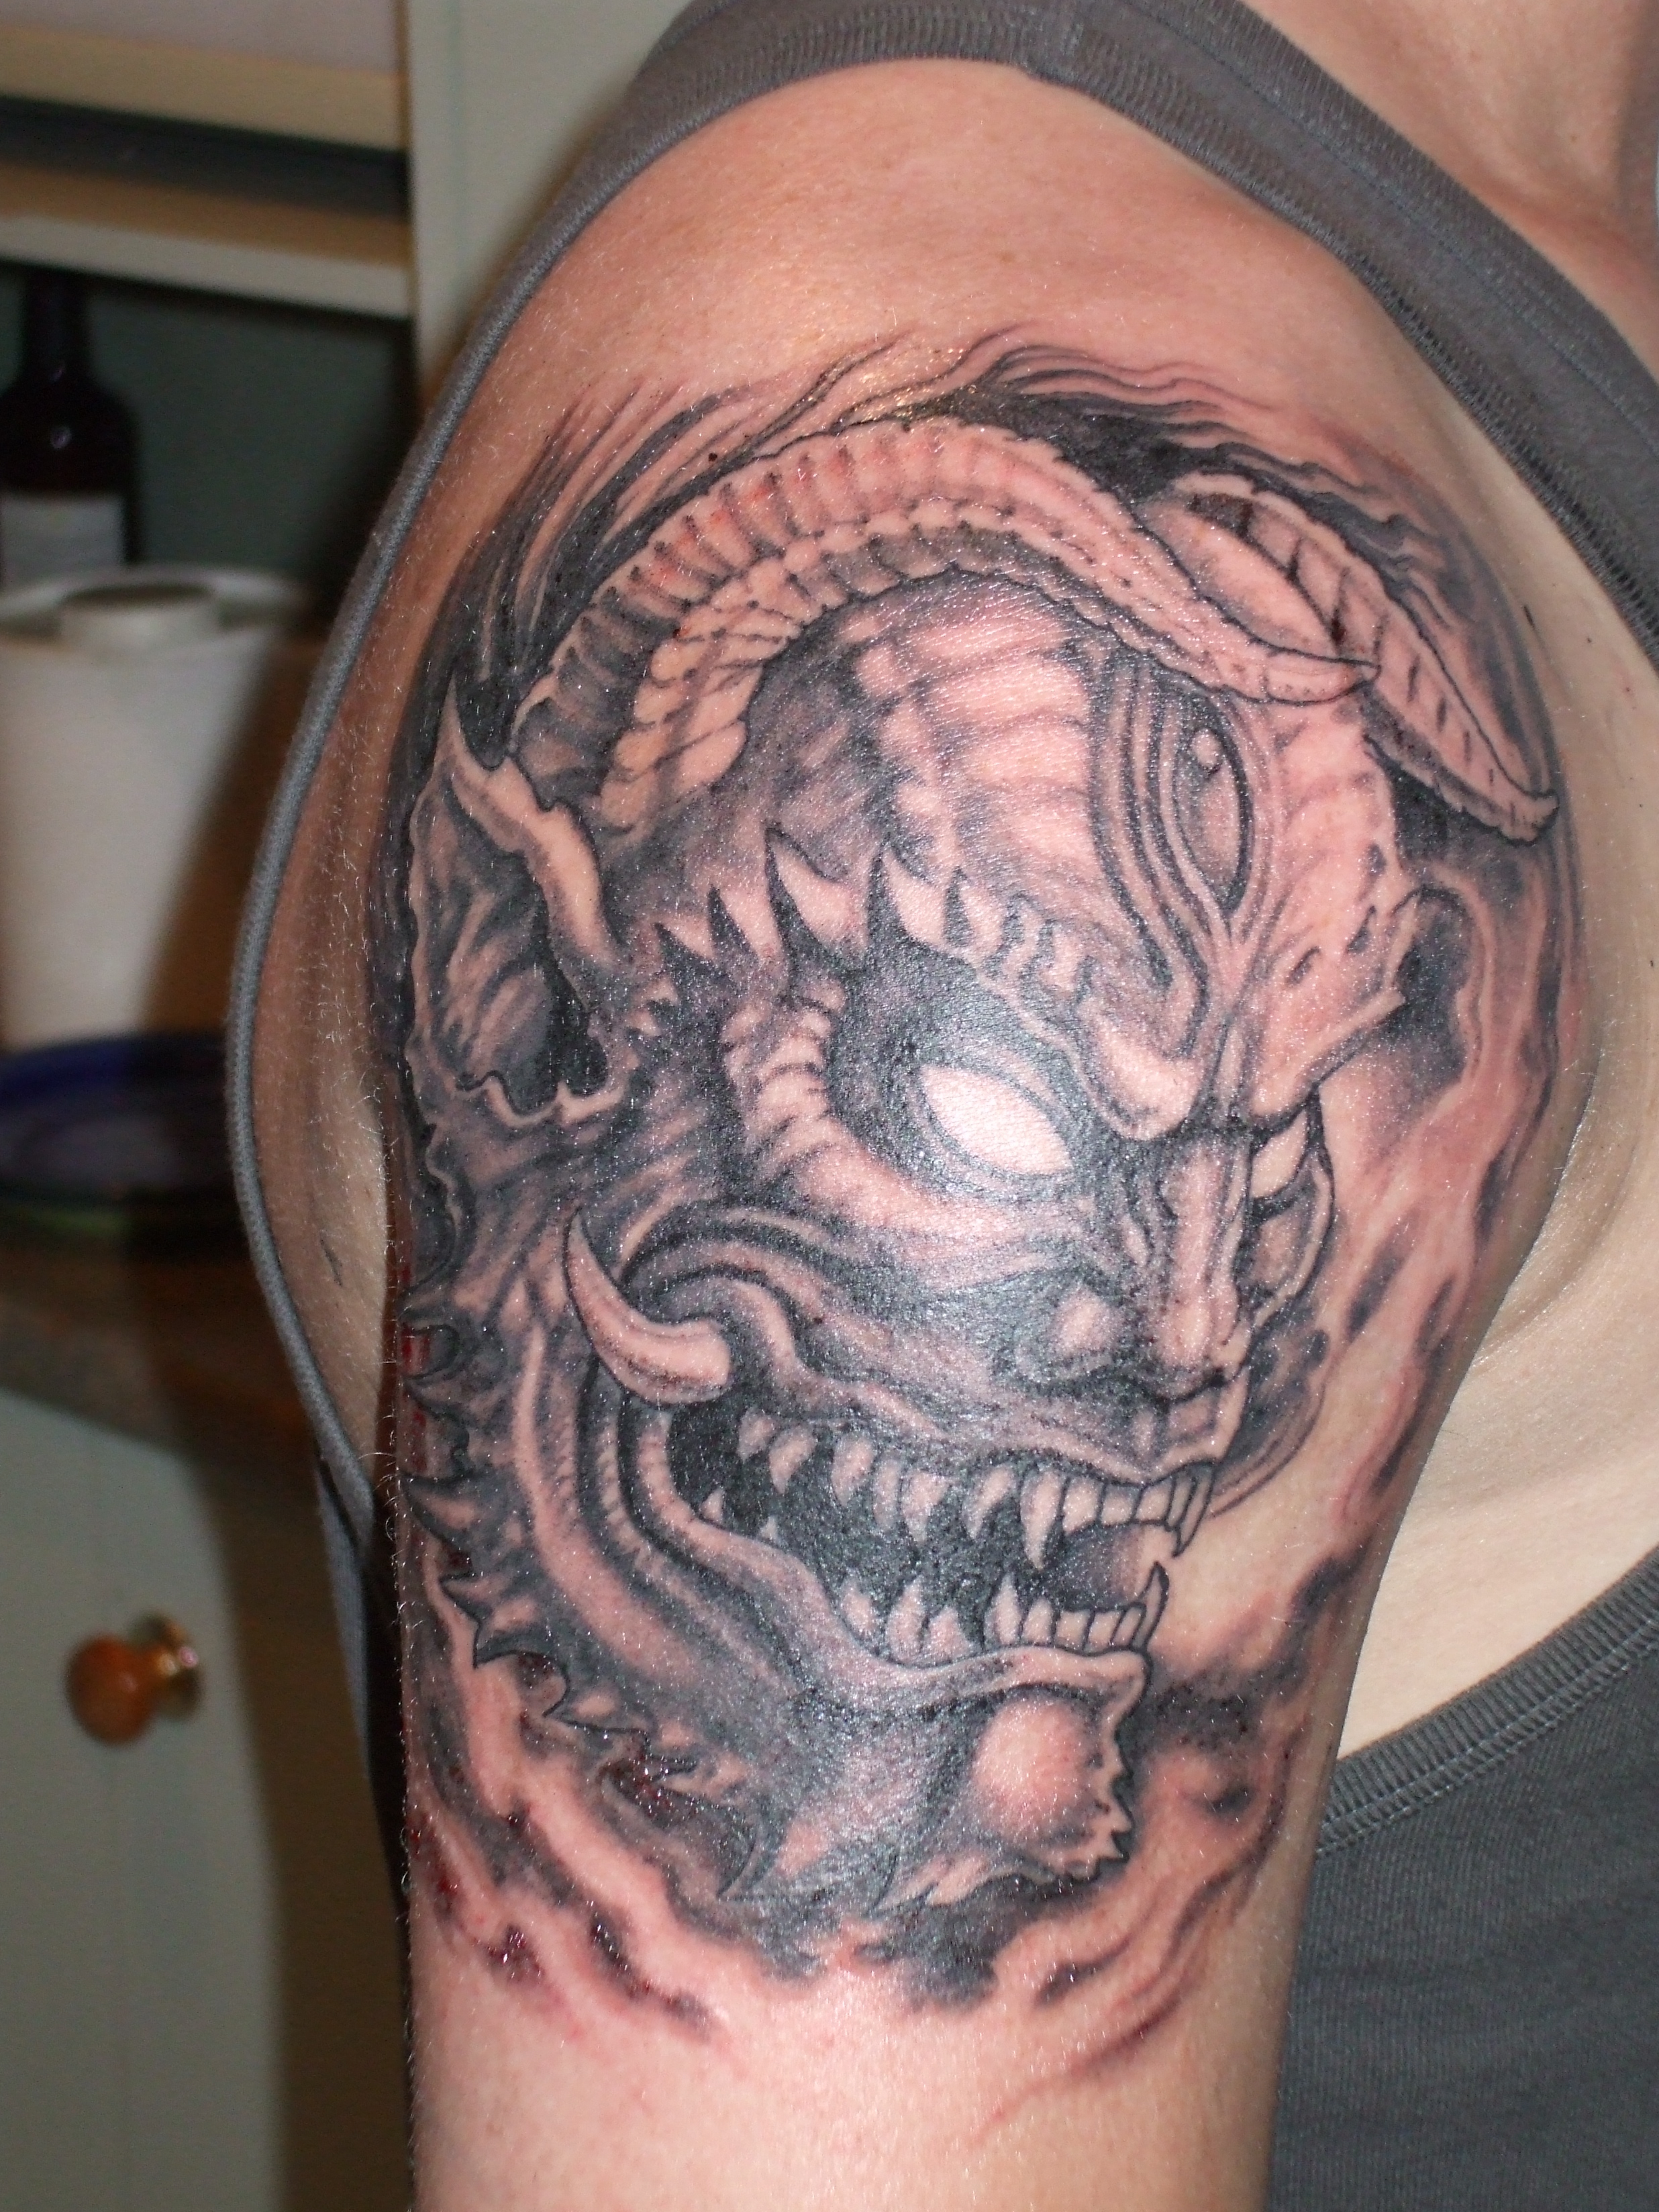 Demon Tattoos Designs, Ideas and Meaning | Tattoos For You